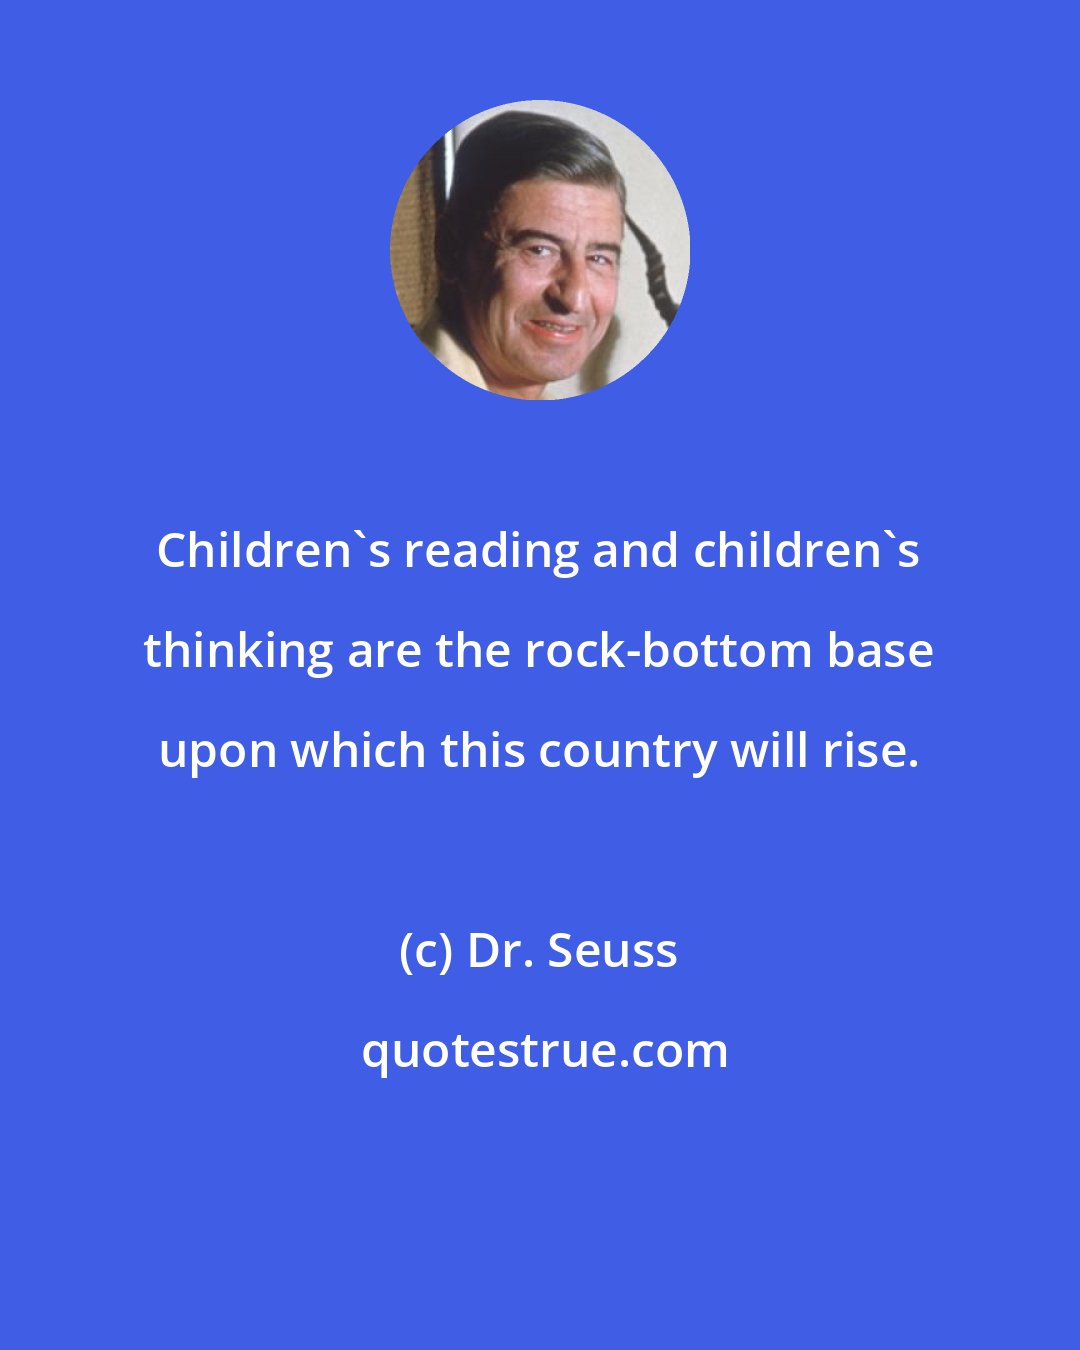 Dr. Seuss: Children's reading and children's thinking are the rock-bottom base upon which this country will rise.